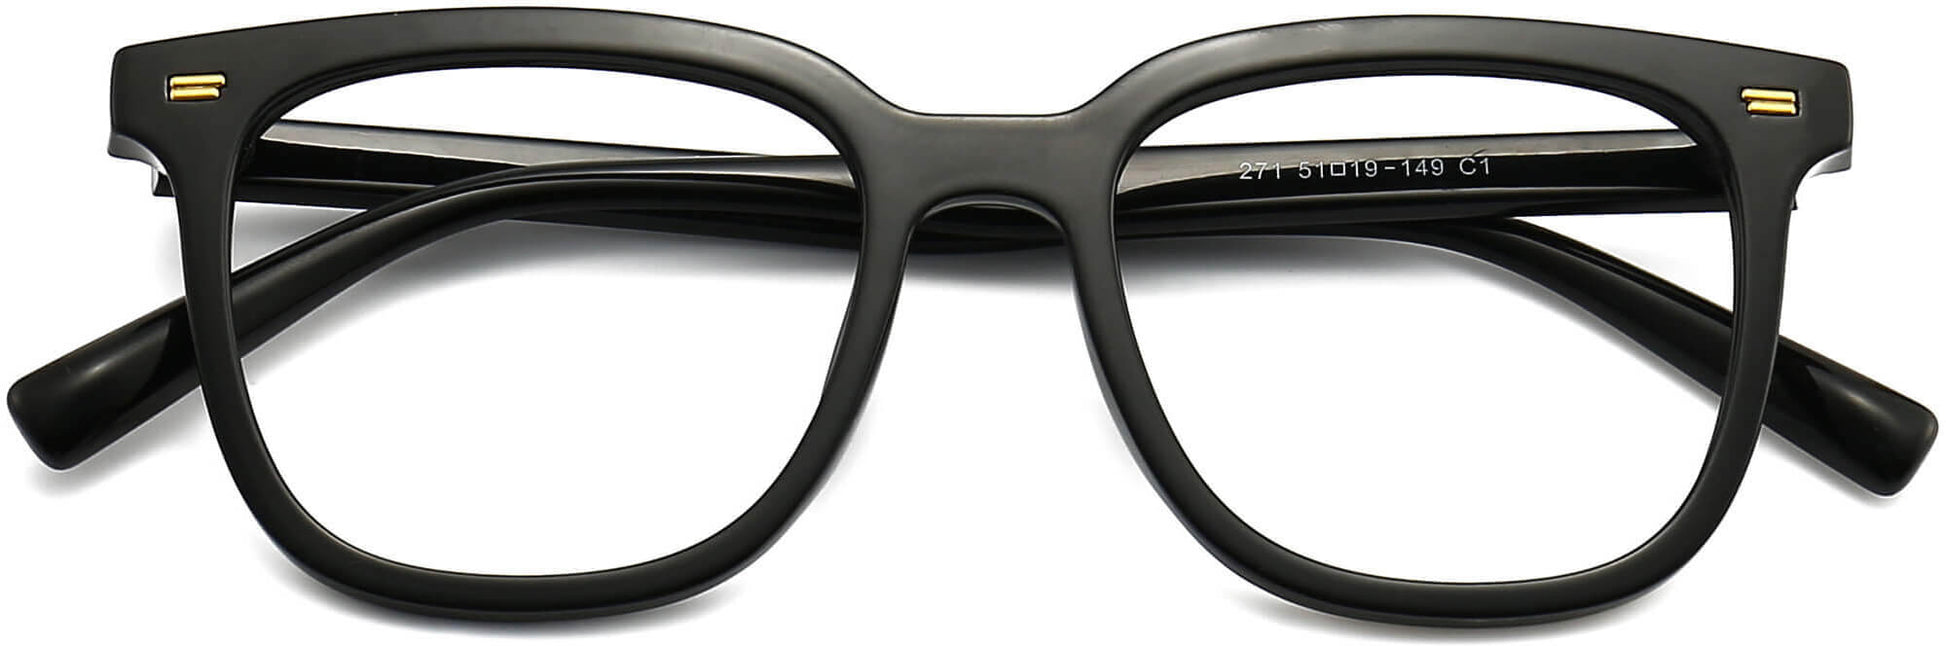 Catalina Square Black Eyeglasses from ANRRI, closed view